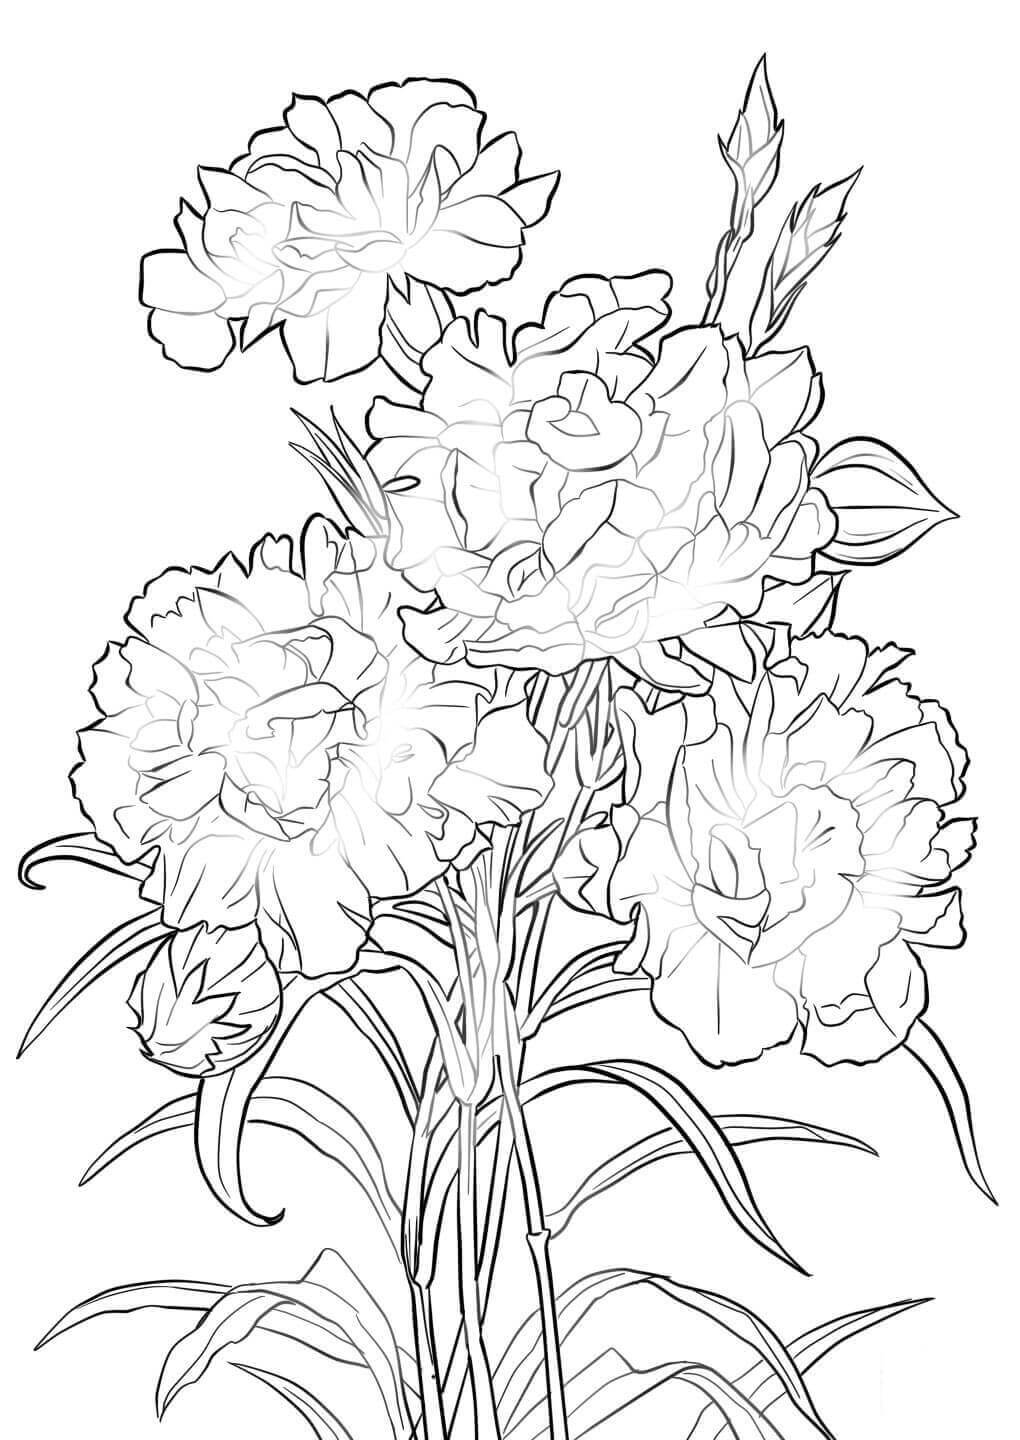 12 Scarlet Carnation flowers coloring pages